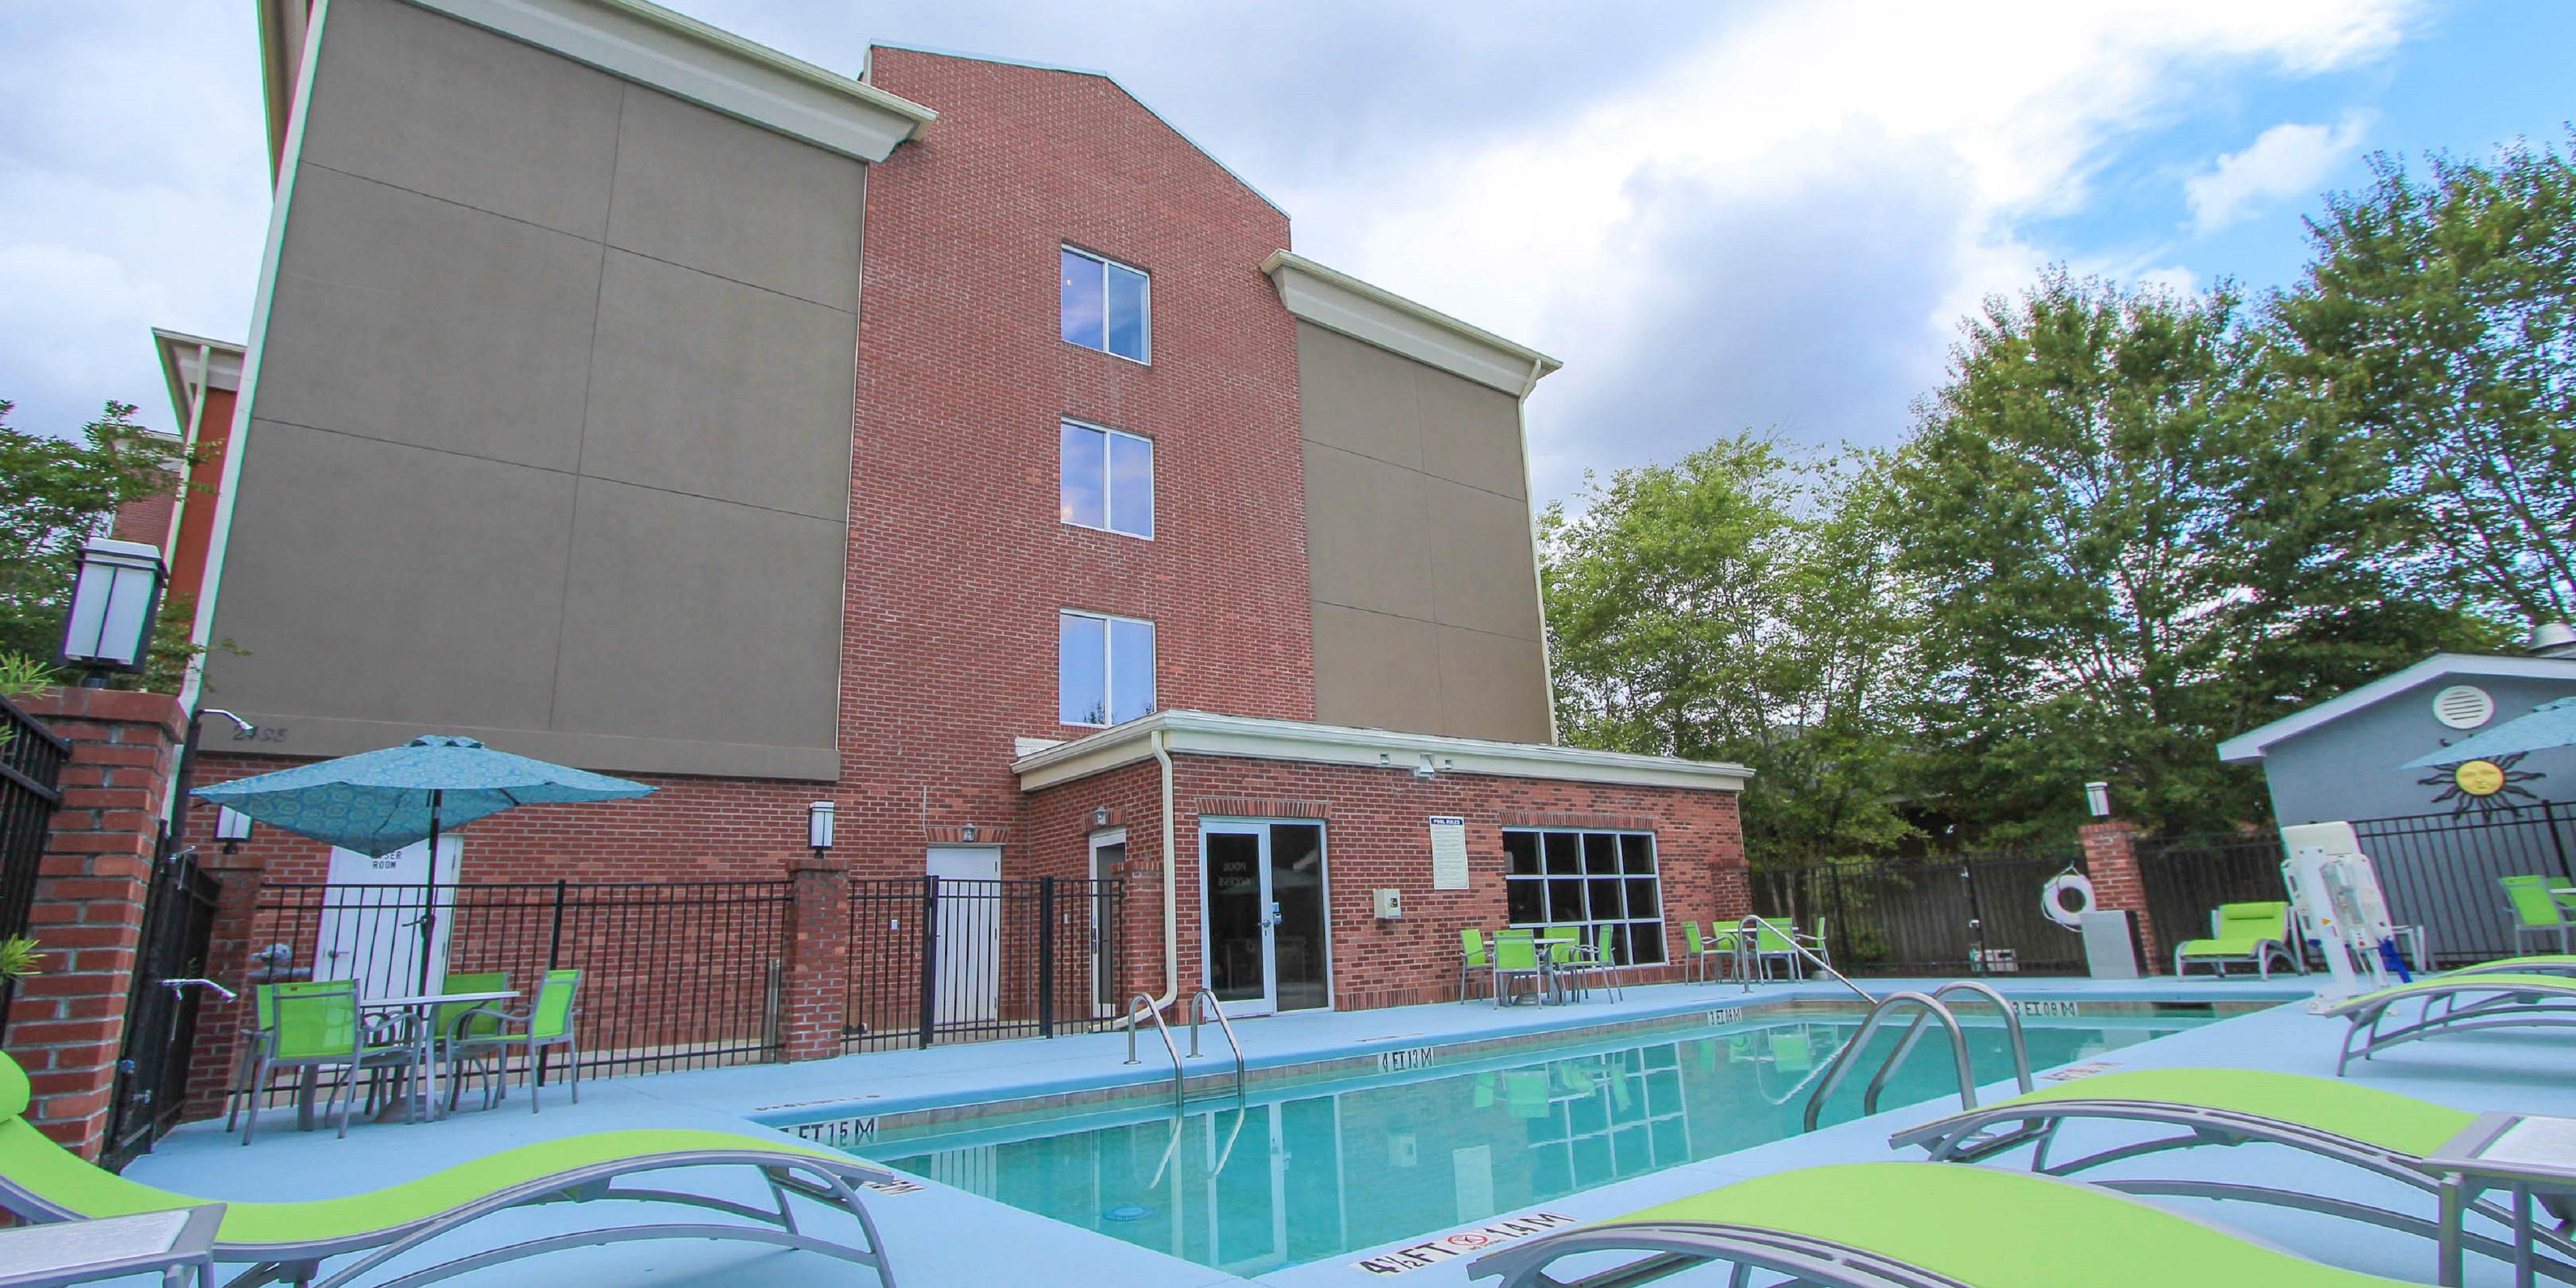 Outdoor pool is open 1 April through 30 October. Time to take a break from the heat. Come and relax pool side. 